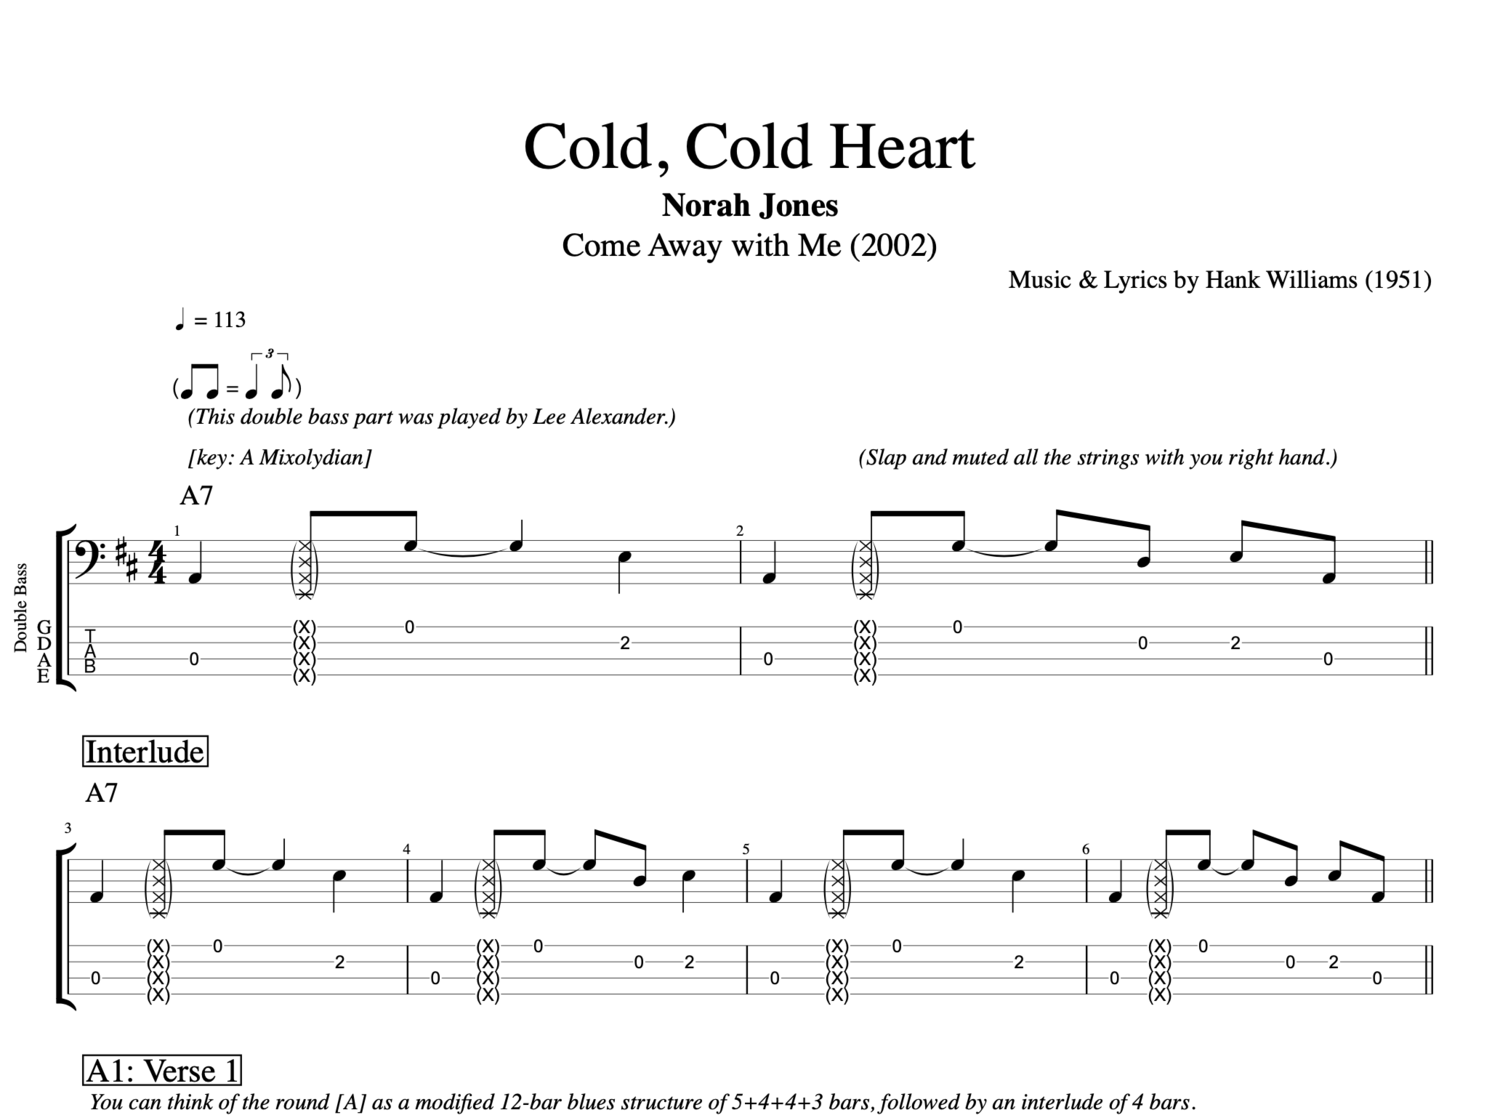 Cold cold heart текст. Cold Cold Heart. Партия баса к Элоизе.